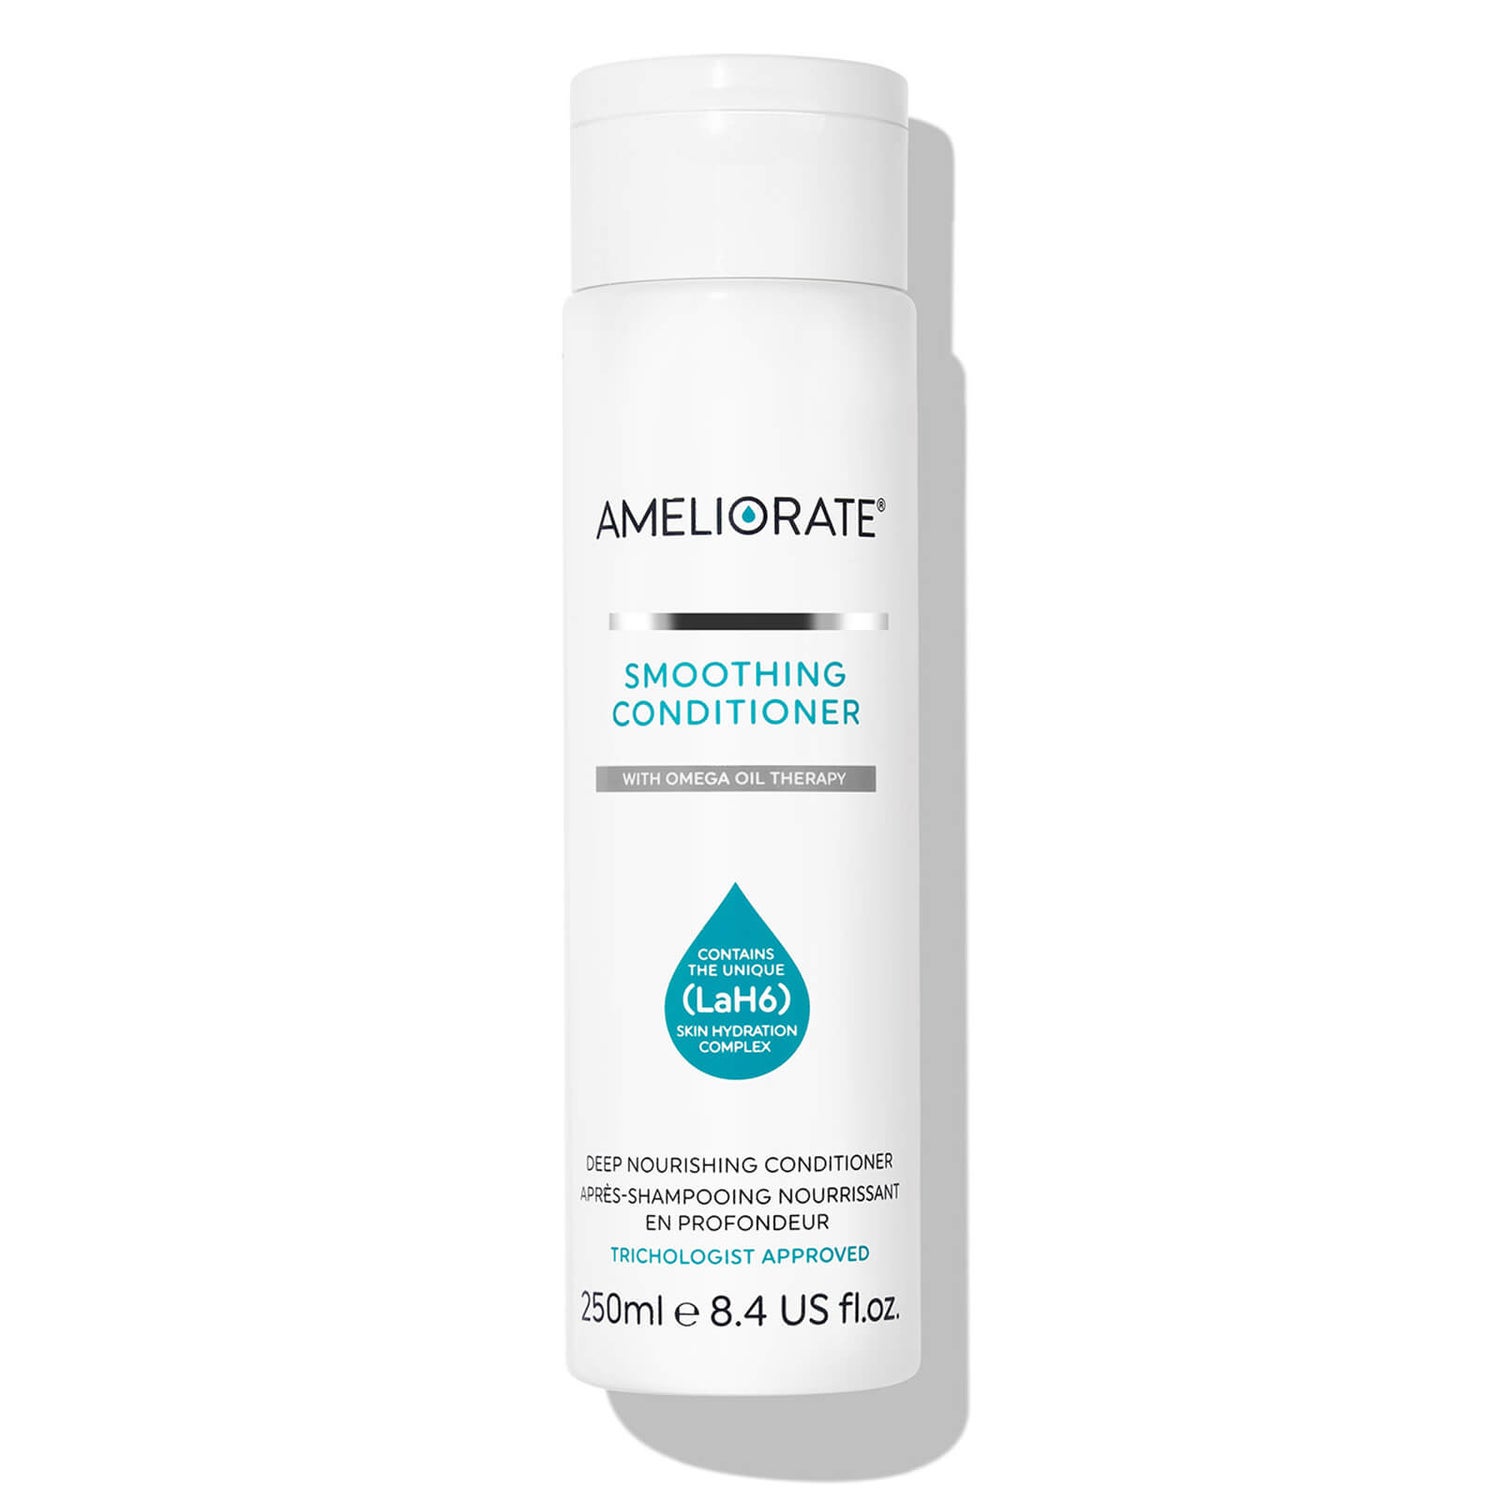 AMELIORATE Smoothing Conditioner 250ml